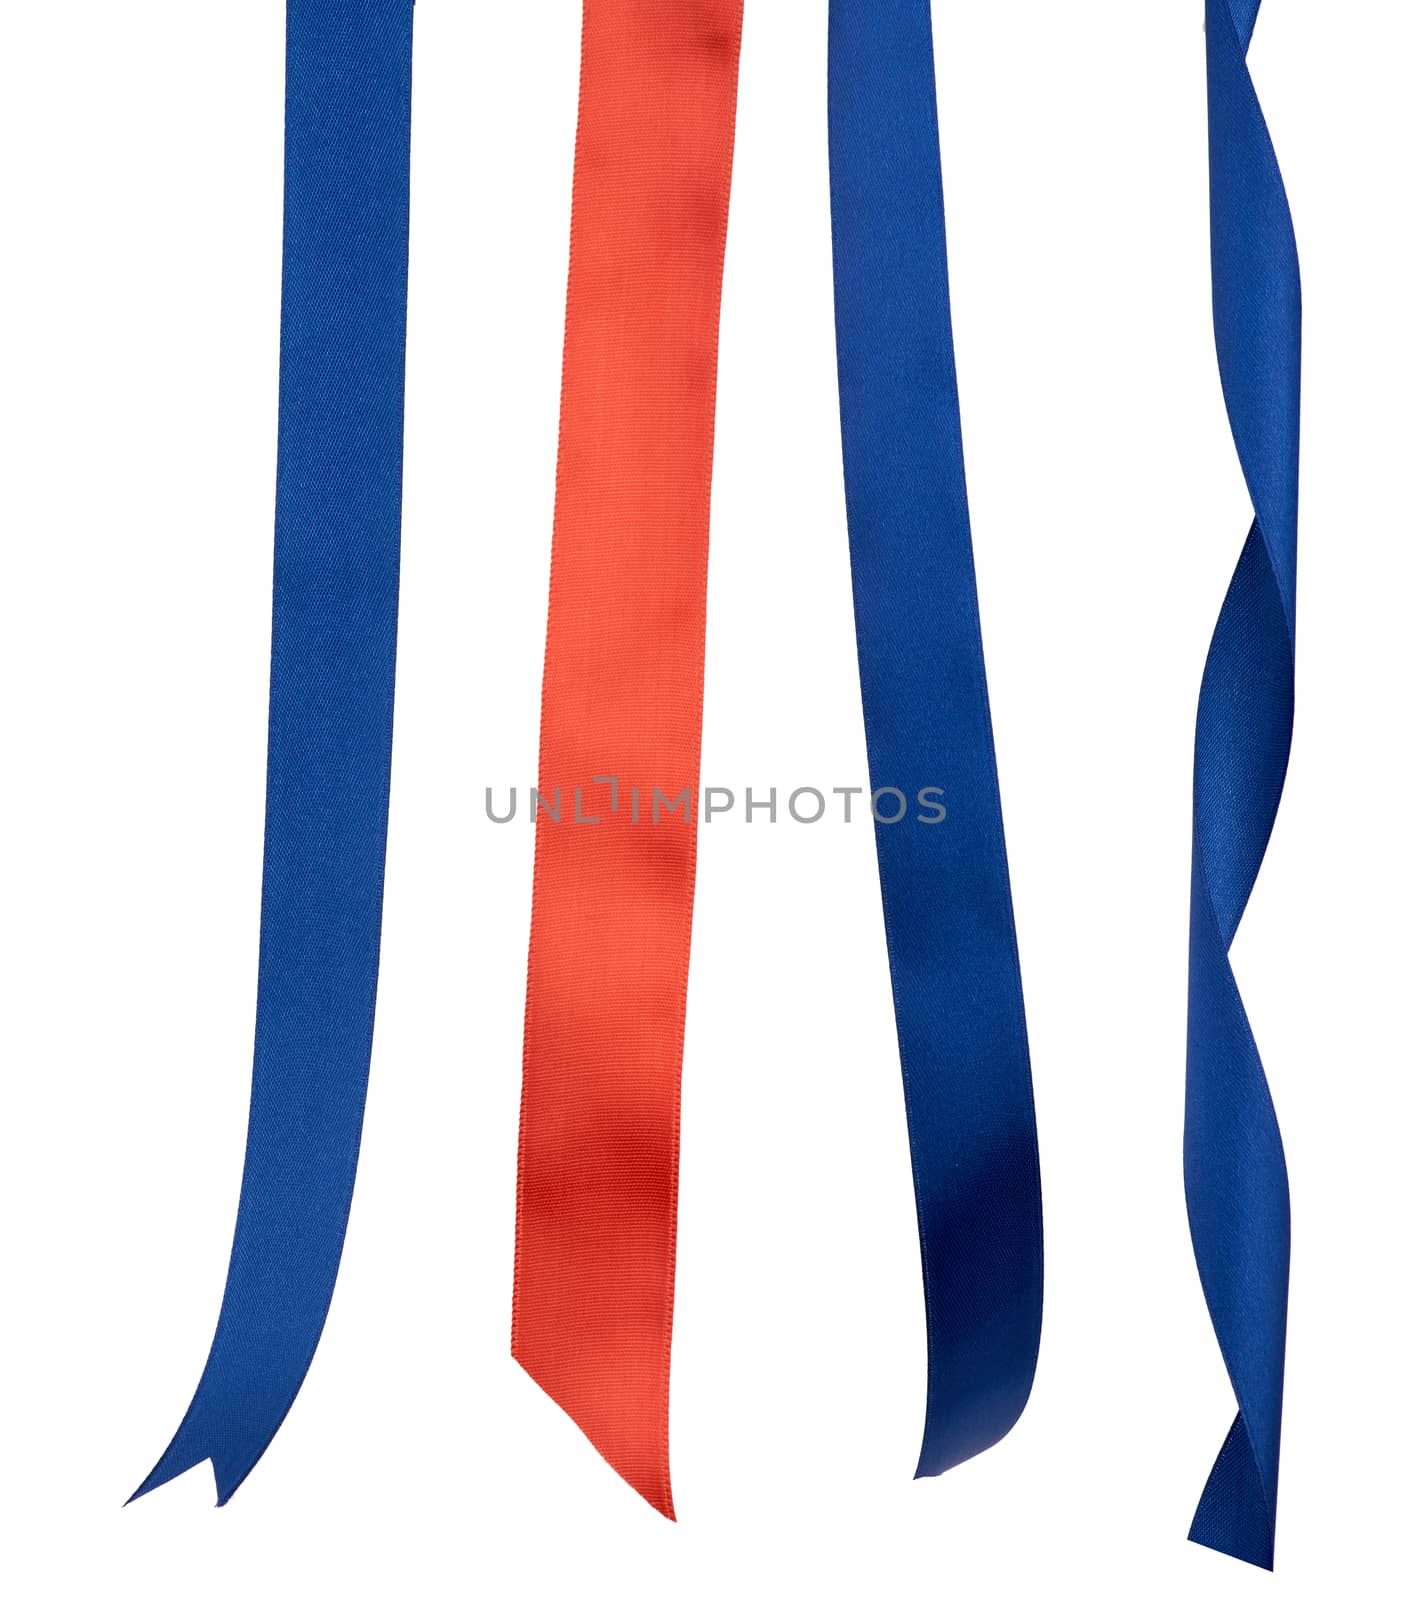 dark blue and red silk ribbons isolated on white background by ndanko